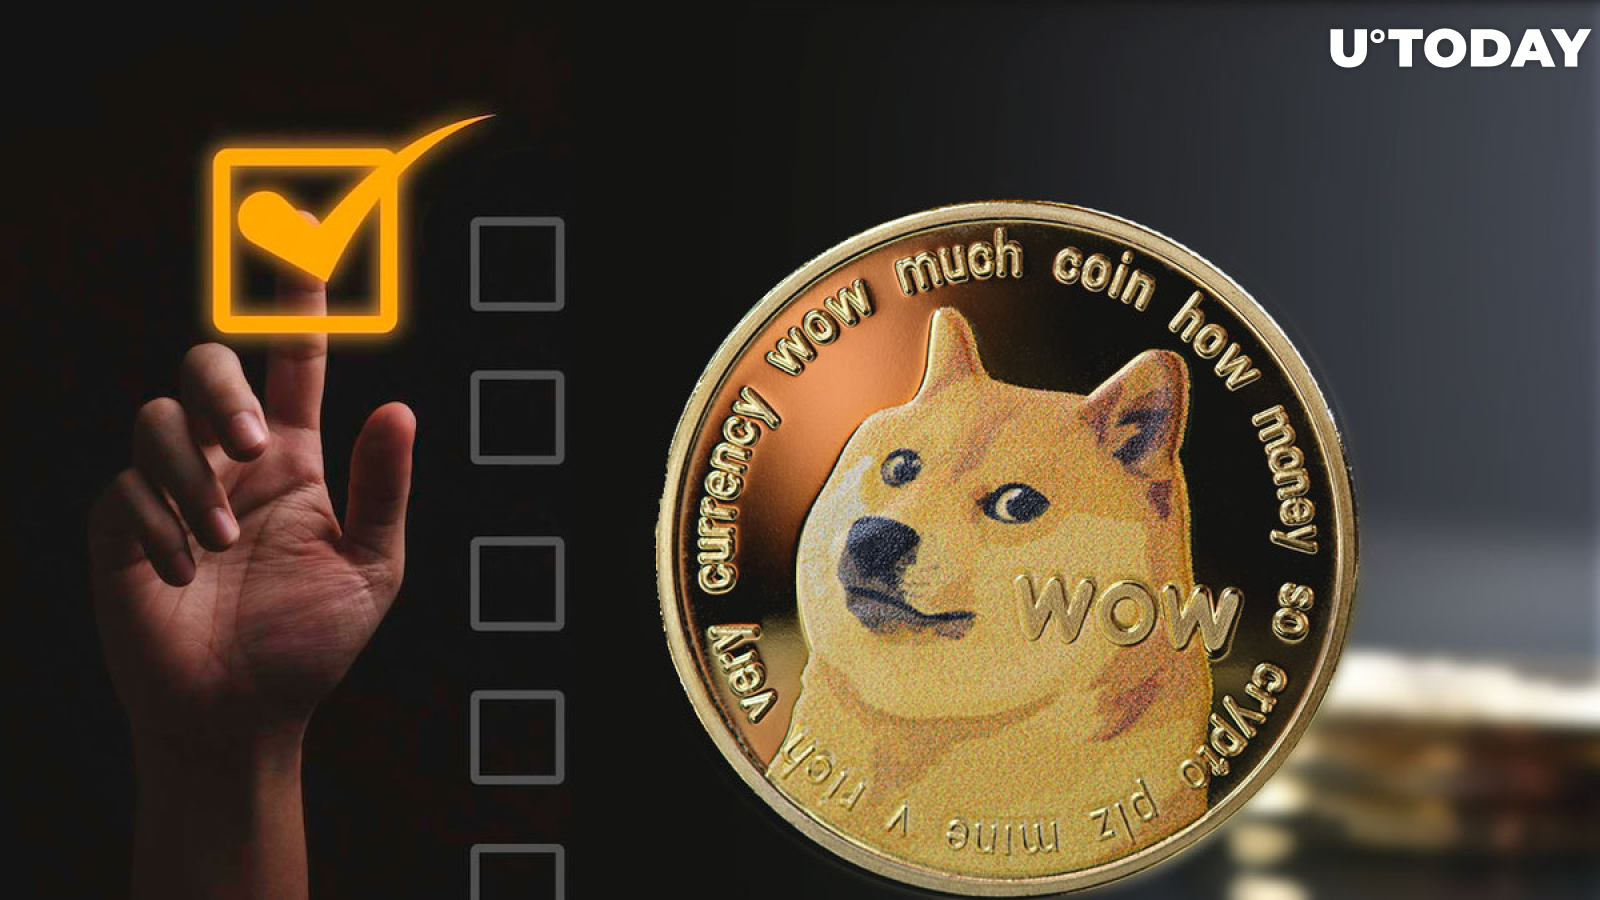 Dogecoin Foundation Director Launches Survey About Potential DOGE Hackathon This Year: Details